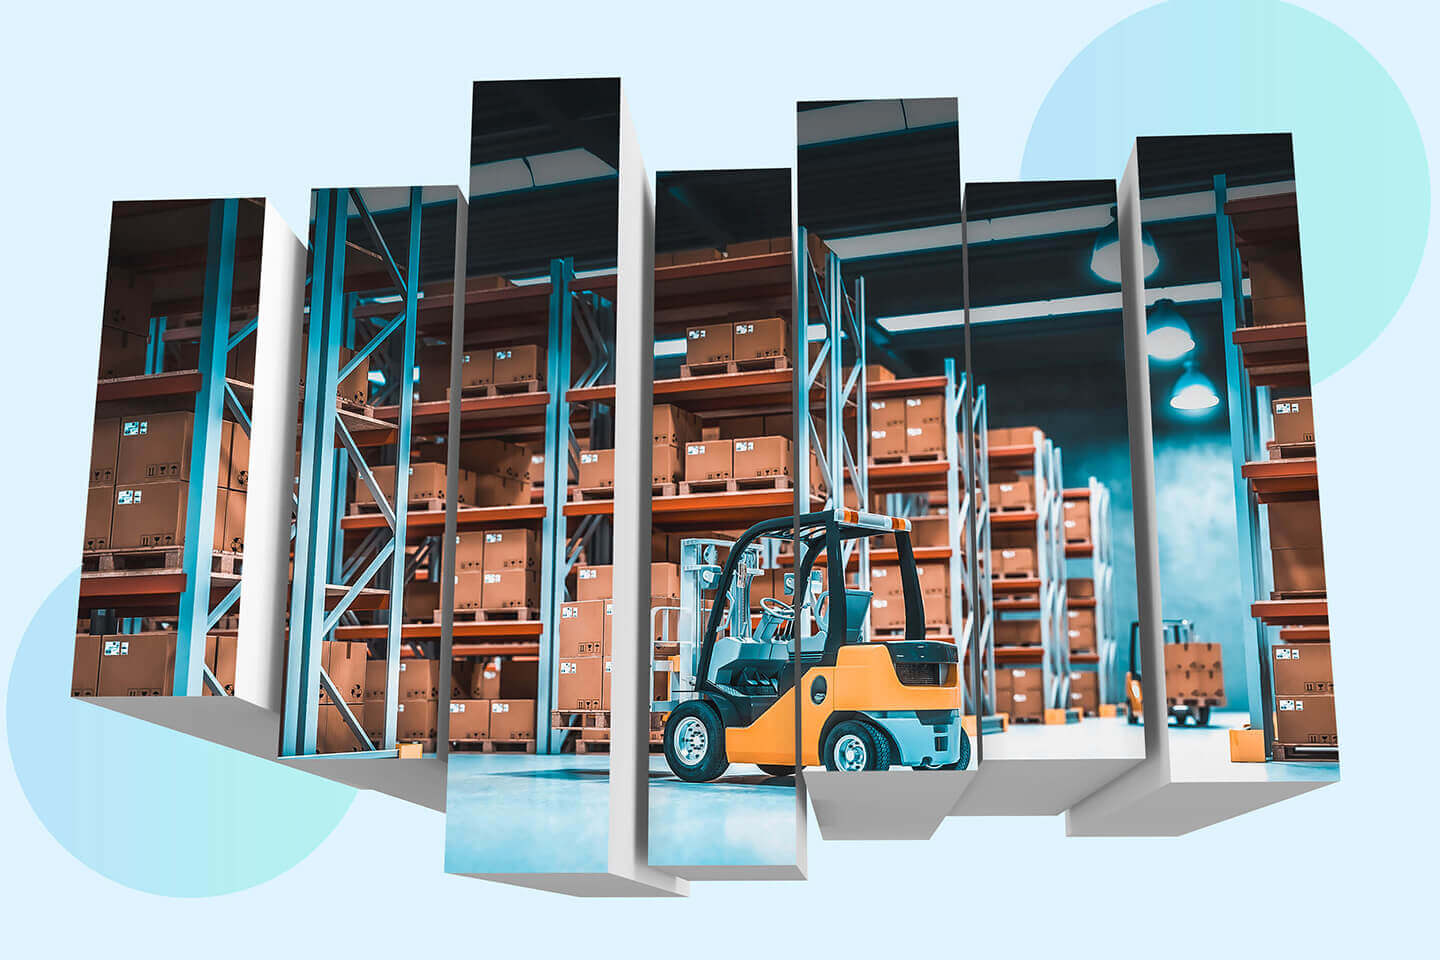 Strategies to Manage Warehouse Operations With Cloud-Based Systems